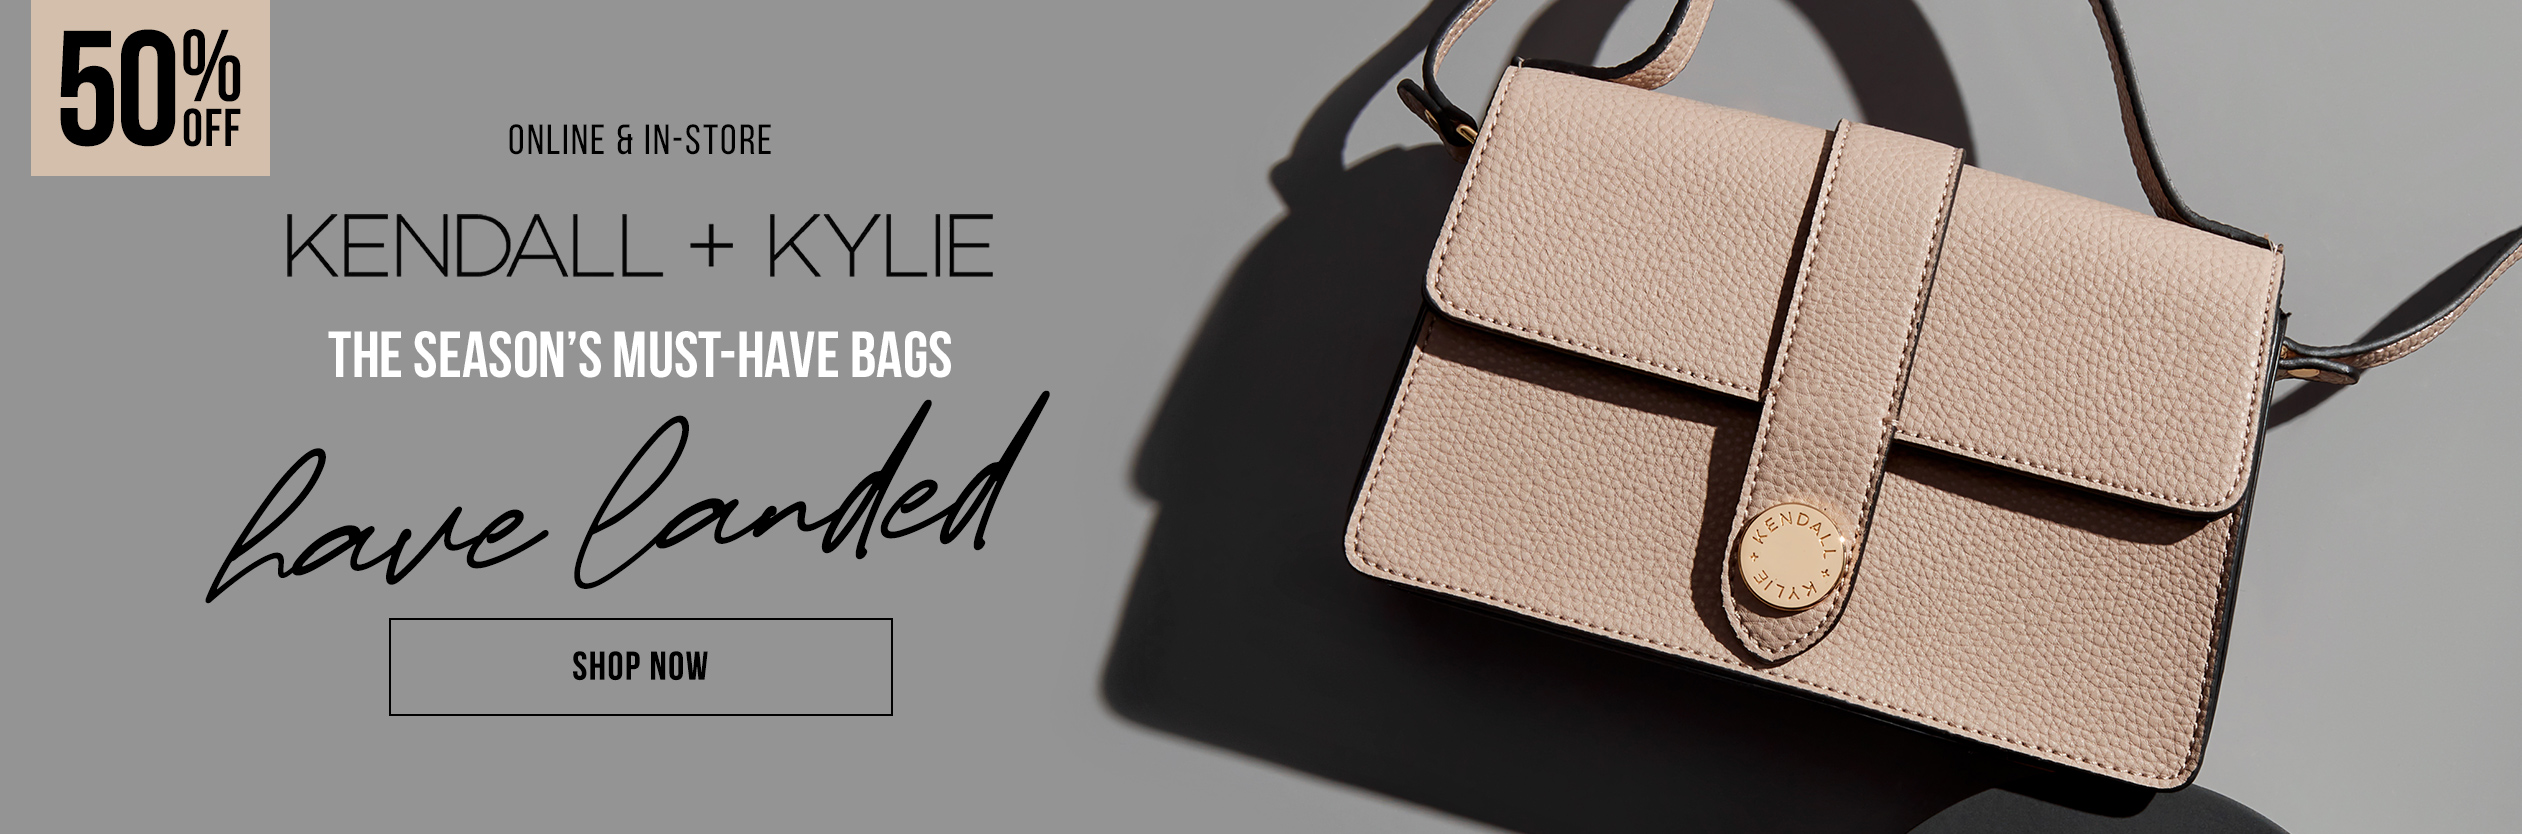 Online & In-Store Kendall + Kyle This Season's Must-Have Bags Have Landed - Shop Now